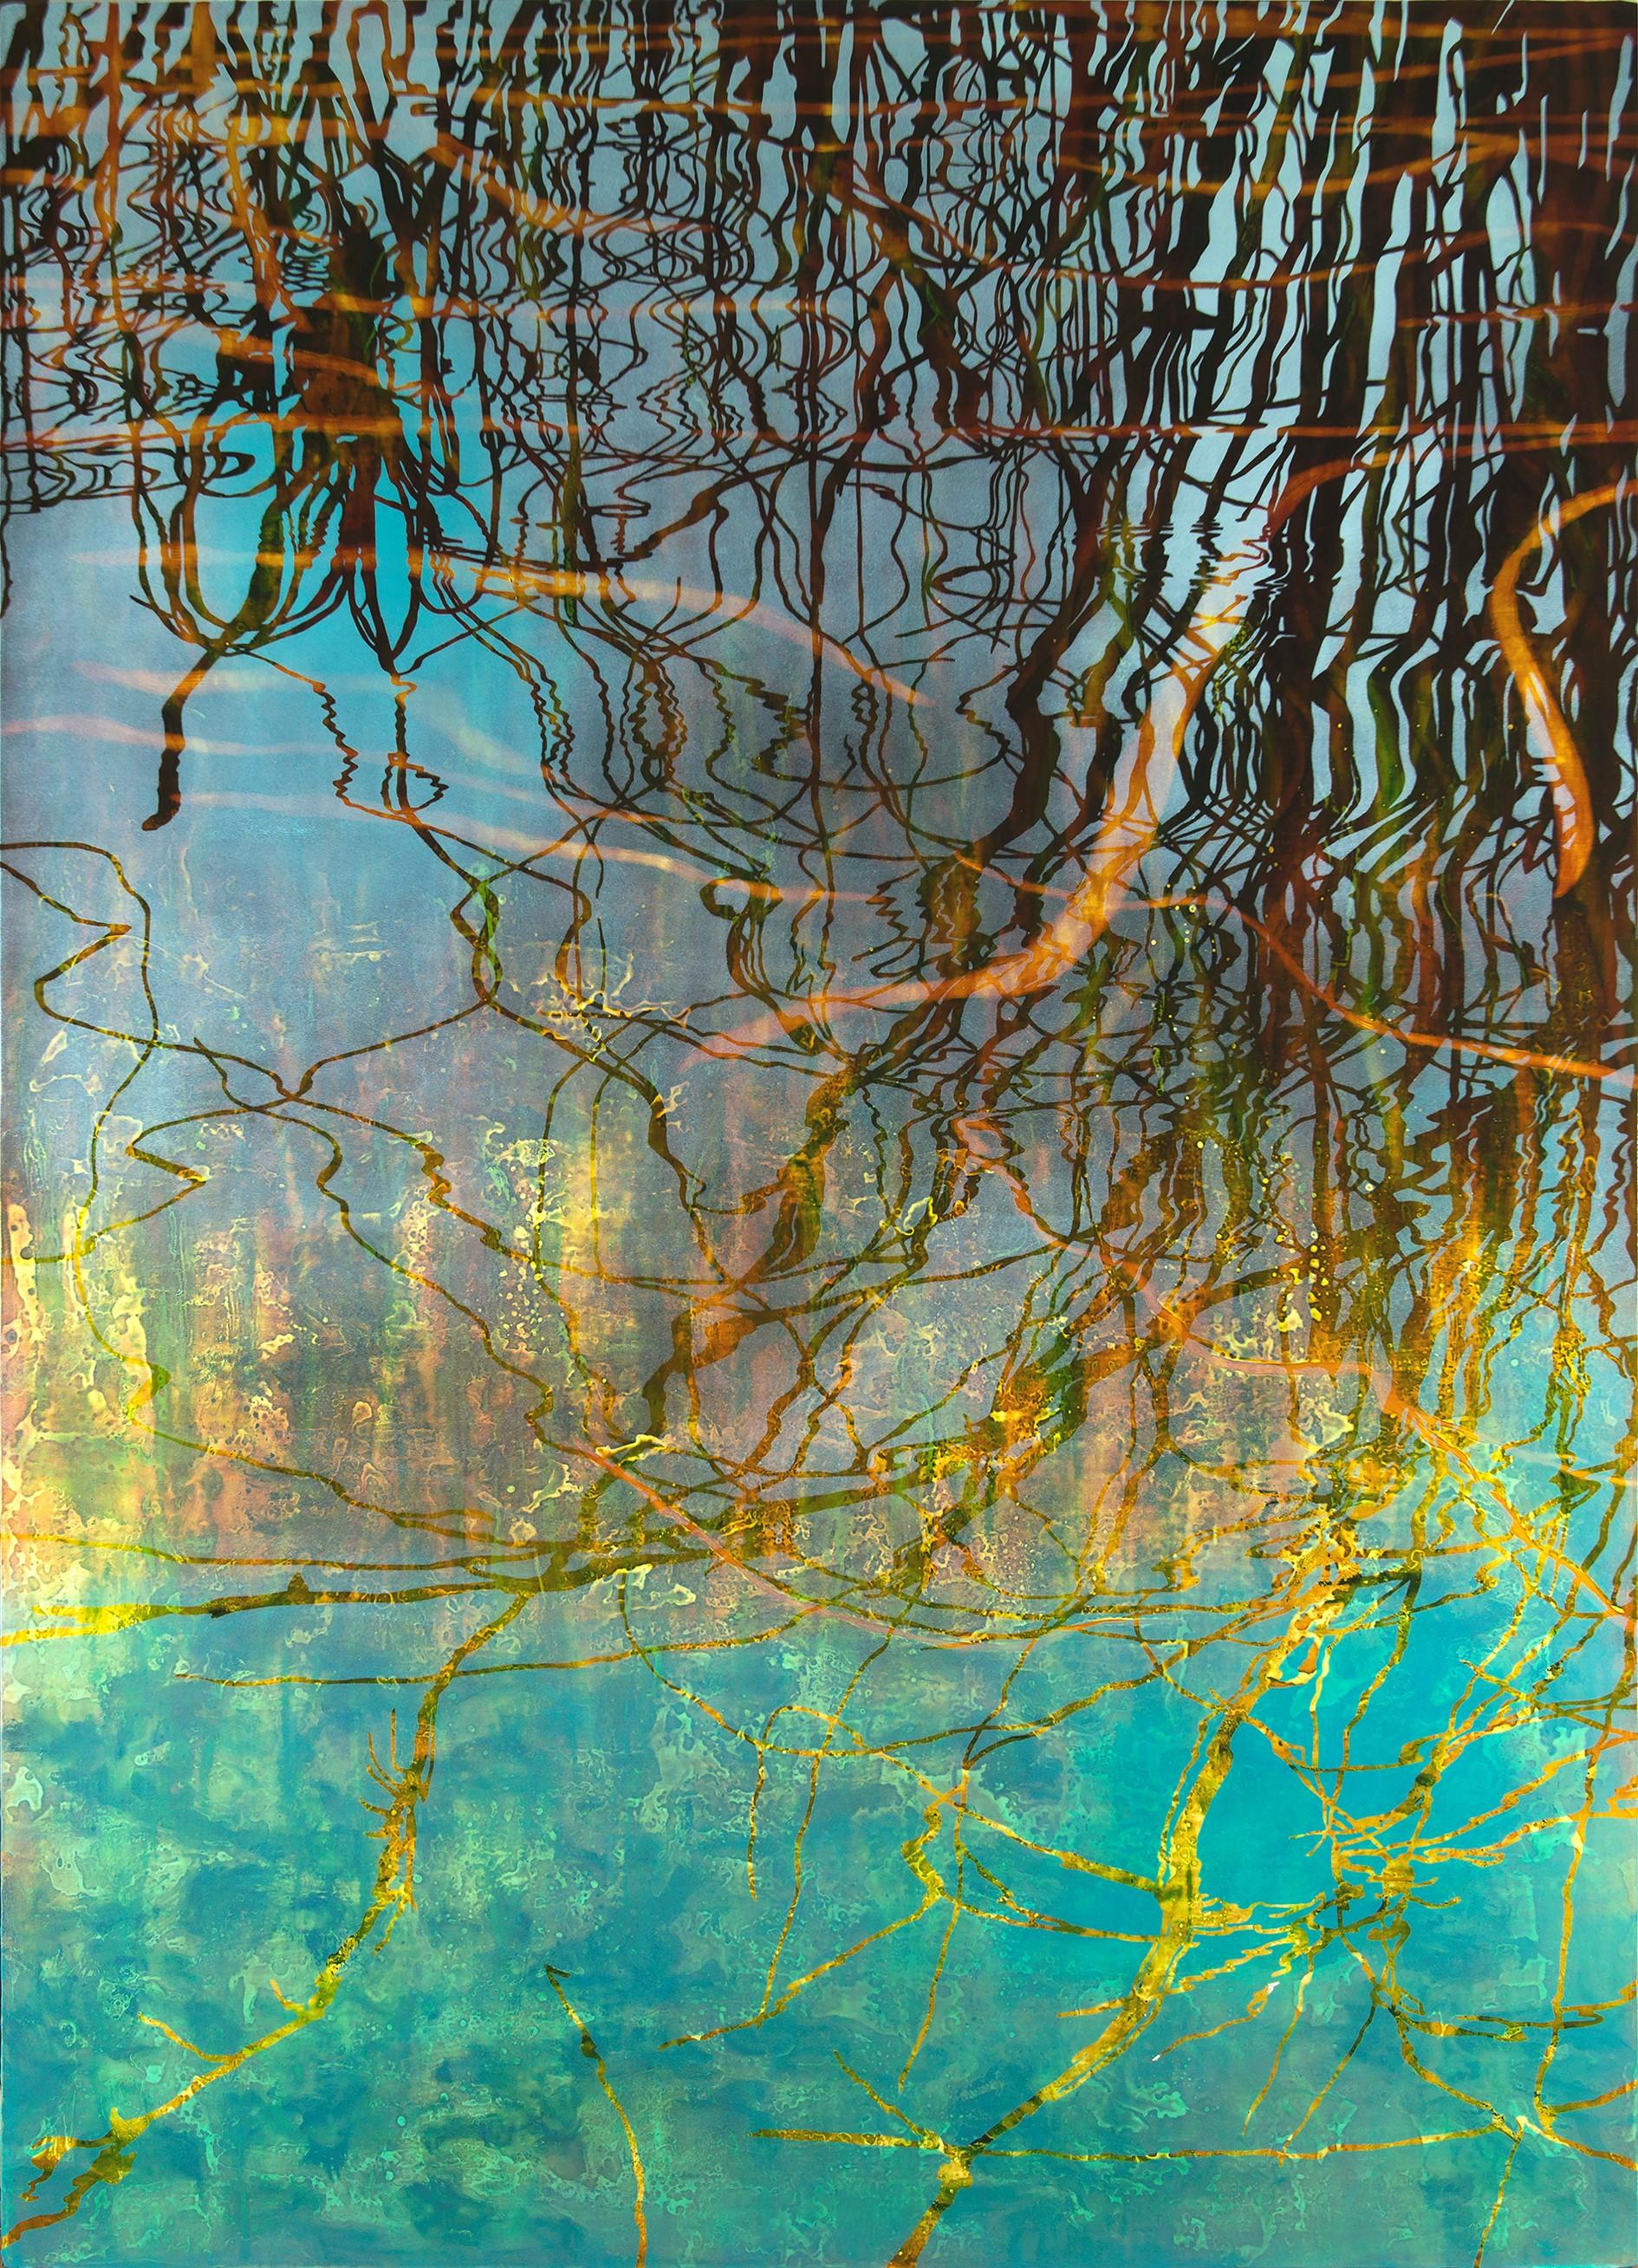 Perididas III - Reflections d'eau - tons turquoise et or 70 X 51